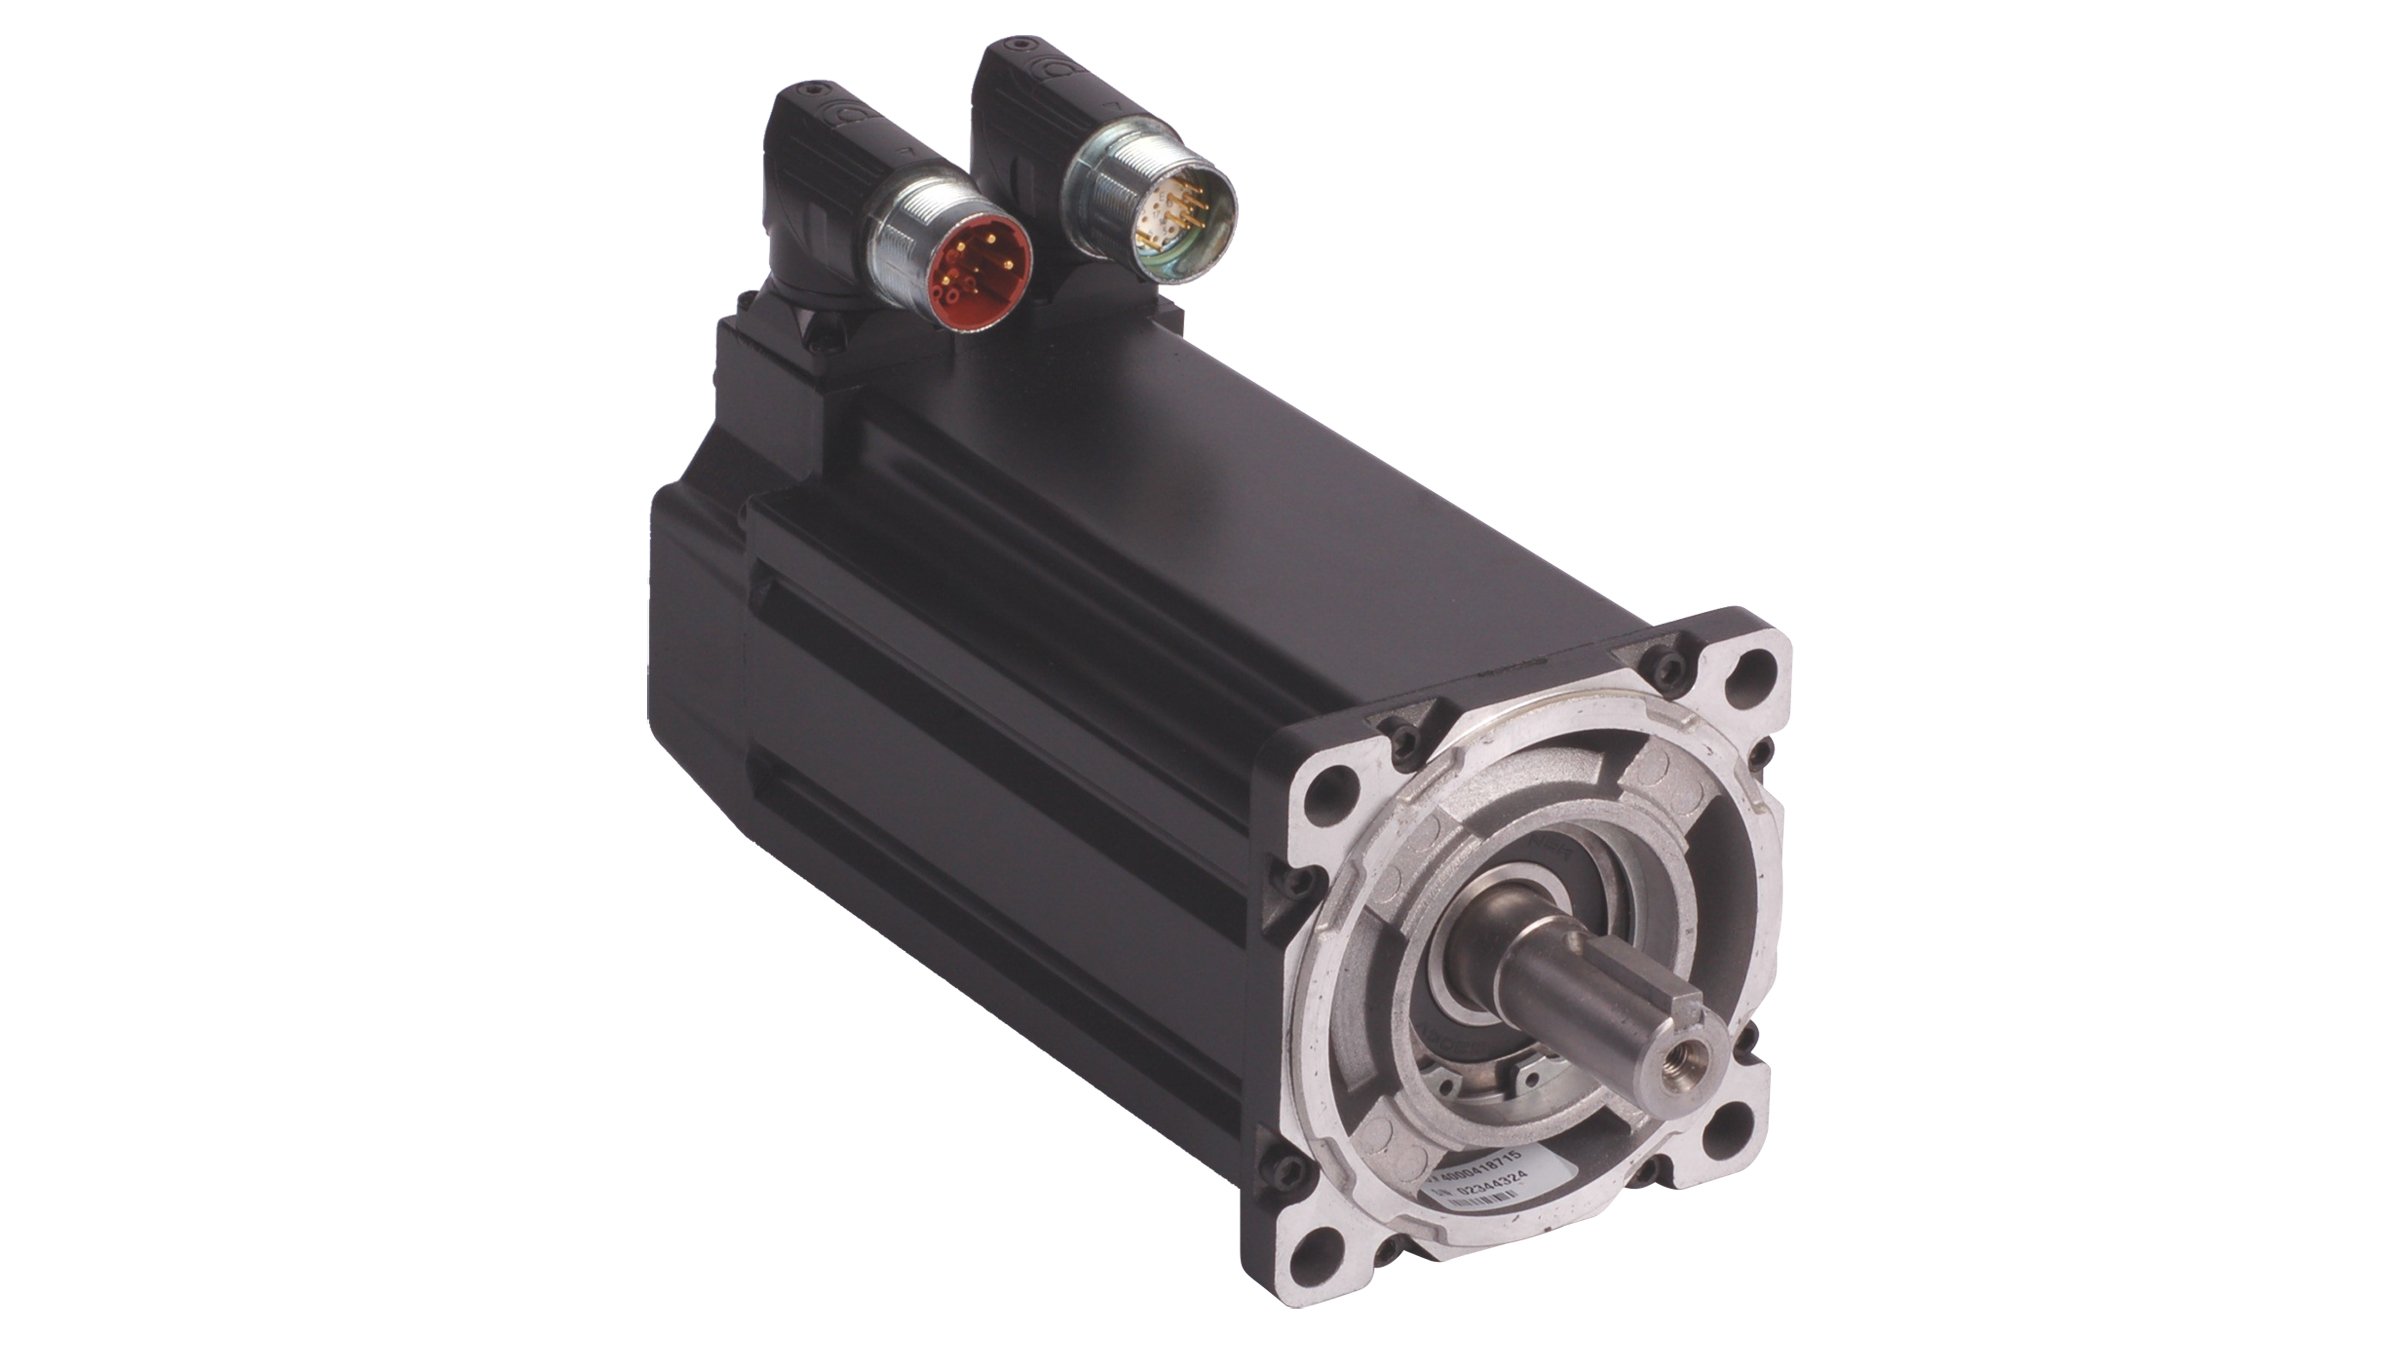 Allen‑Bradley MP-Series™ Low Inertia (MPL) Servo Motors are high-output brushless motors which use innovative design characteristics to reduce motor size while delivering significantly higher torque.